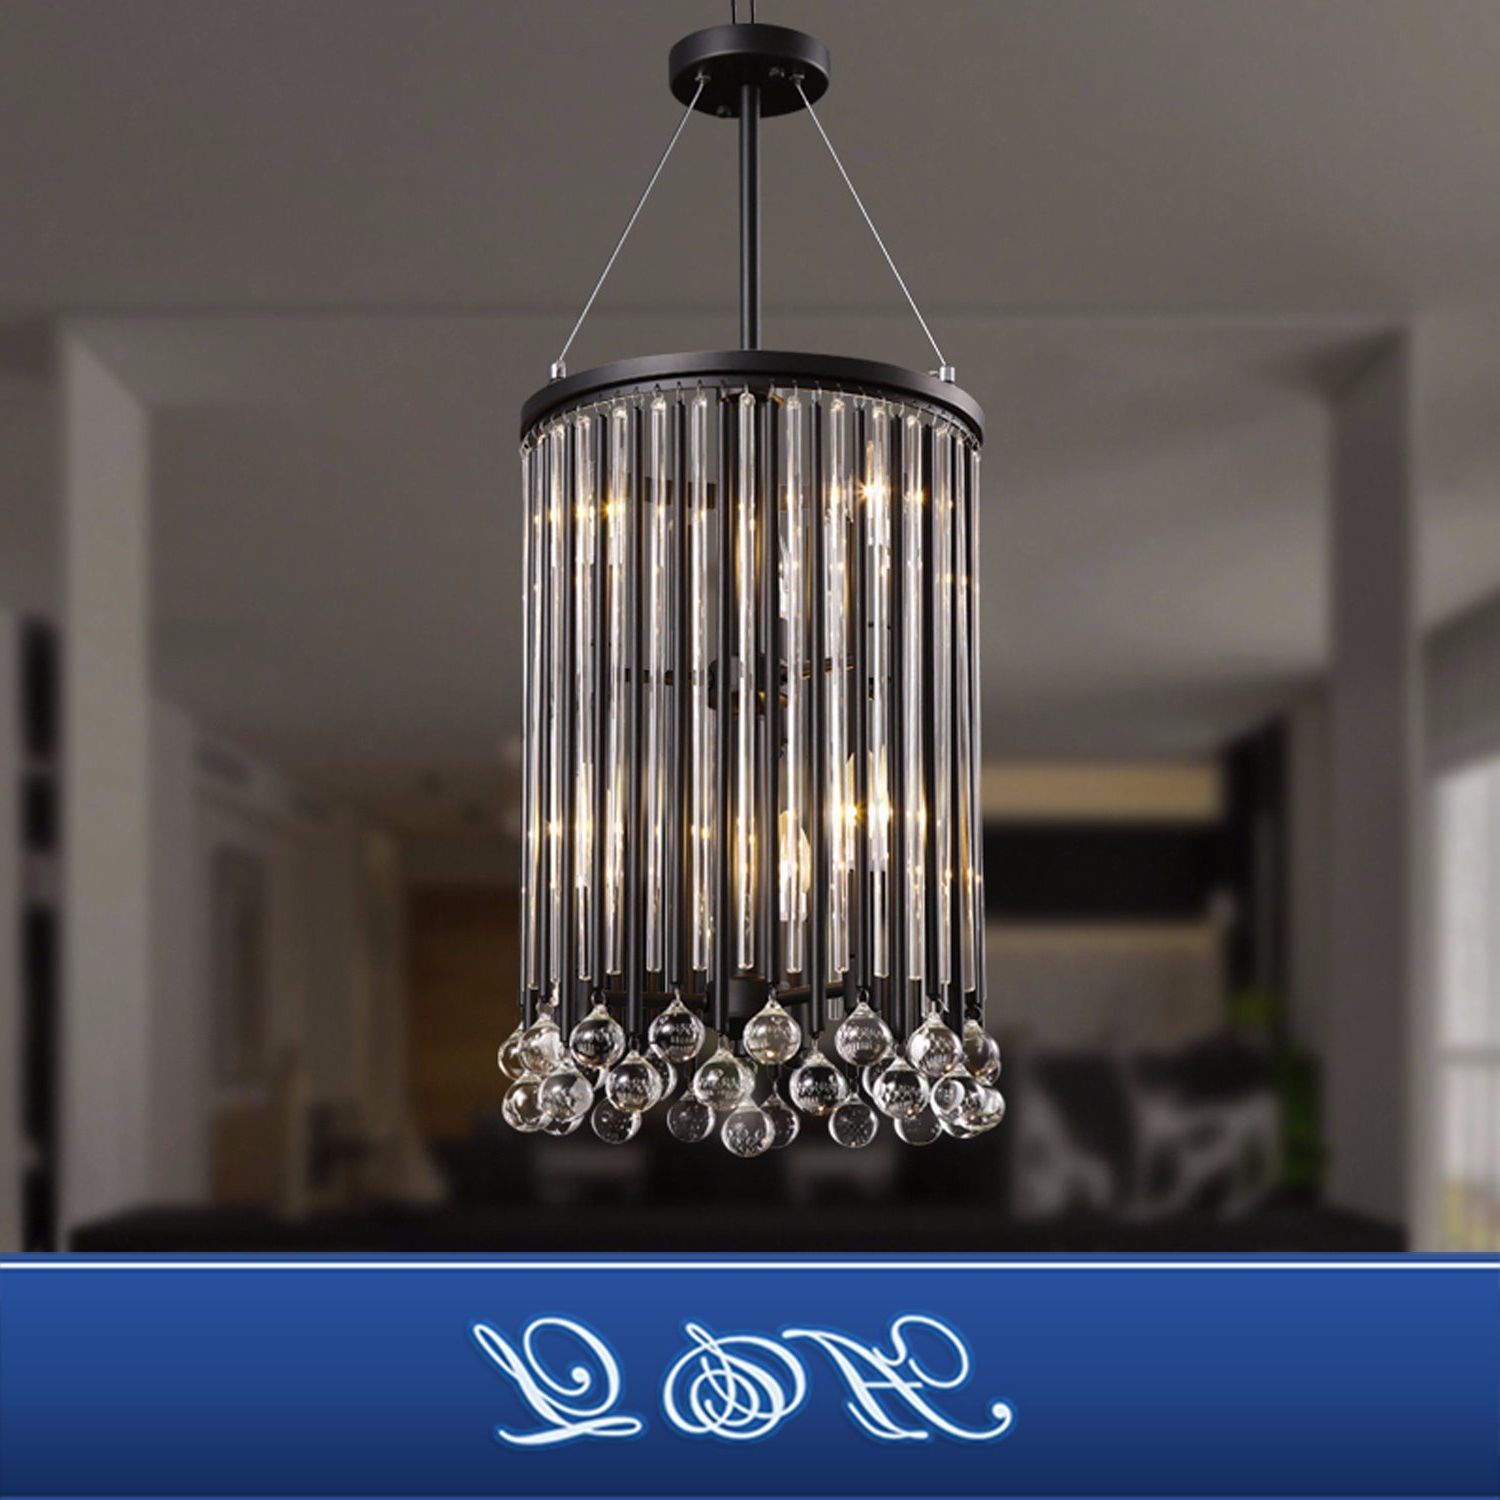 [%[hot Item] Modern Design Drum Style Crystal Chandelier For Living Room For Best And Newest Dailey 4 Light Drum Chandeliers|dailey 4 Light Drum Chandeliers Intended For Trendy [hot Item] Modern Design Drum Style Crystal Chandelier For Living Room|newest Dailey 4 Light Drum Chandeliers For [hot Item] Modern Design Drum Style Crystal Chandelier For Living Room|fashionable [hot Item] Modern Design Drum Style Crystal Chandelier For Living Room Intended For Dailey 4 Light Drum Chandeliers%] (Photo 25 of 25)